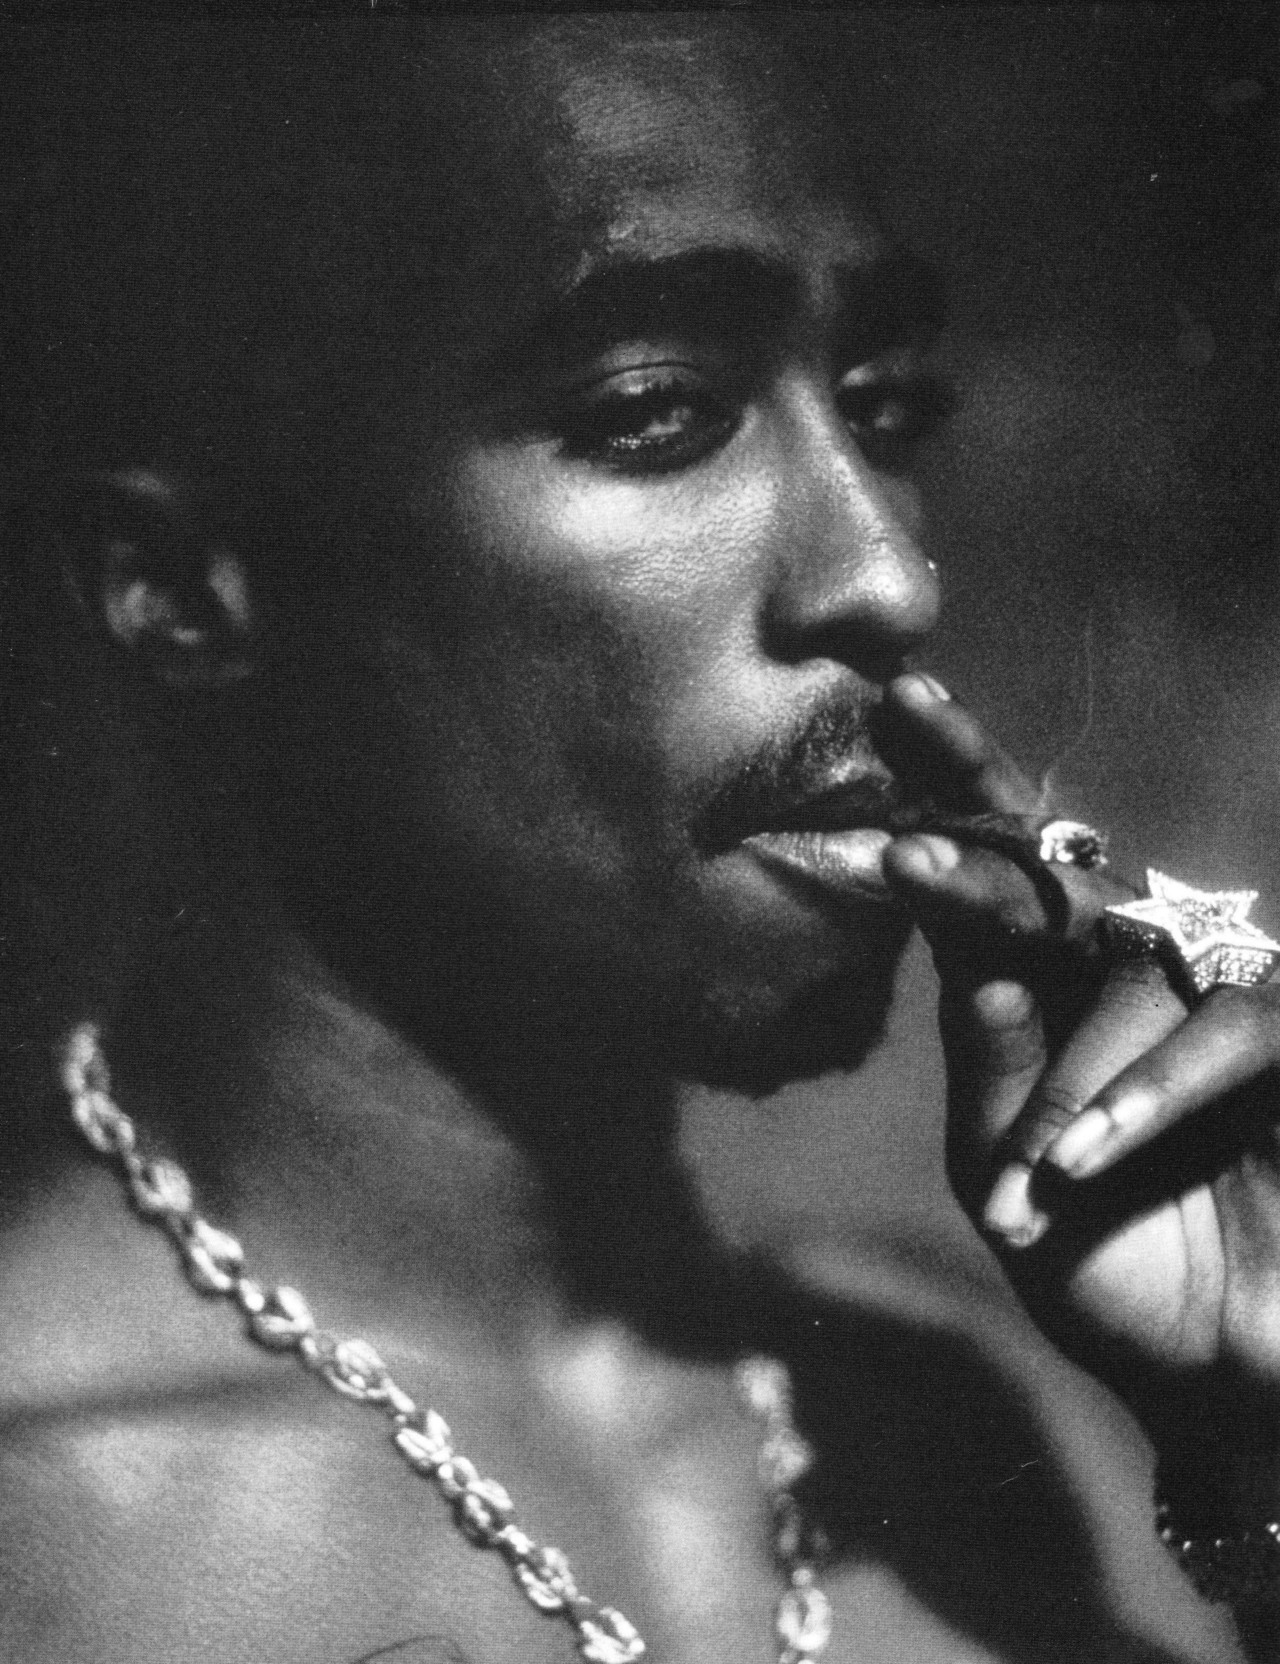 Tupac Quotes About Weed